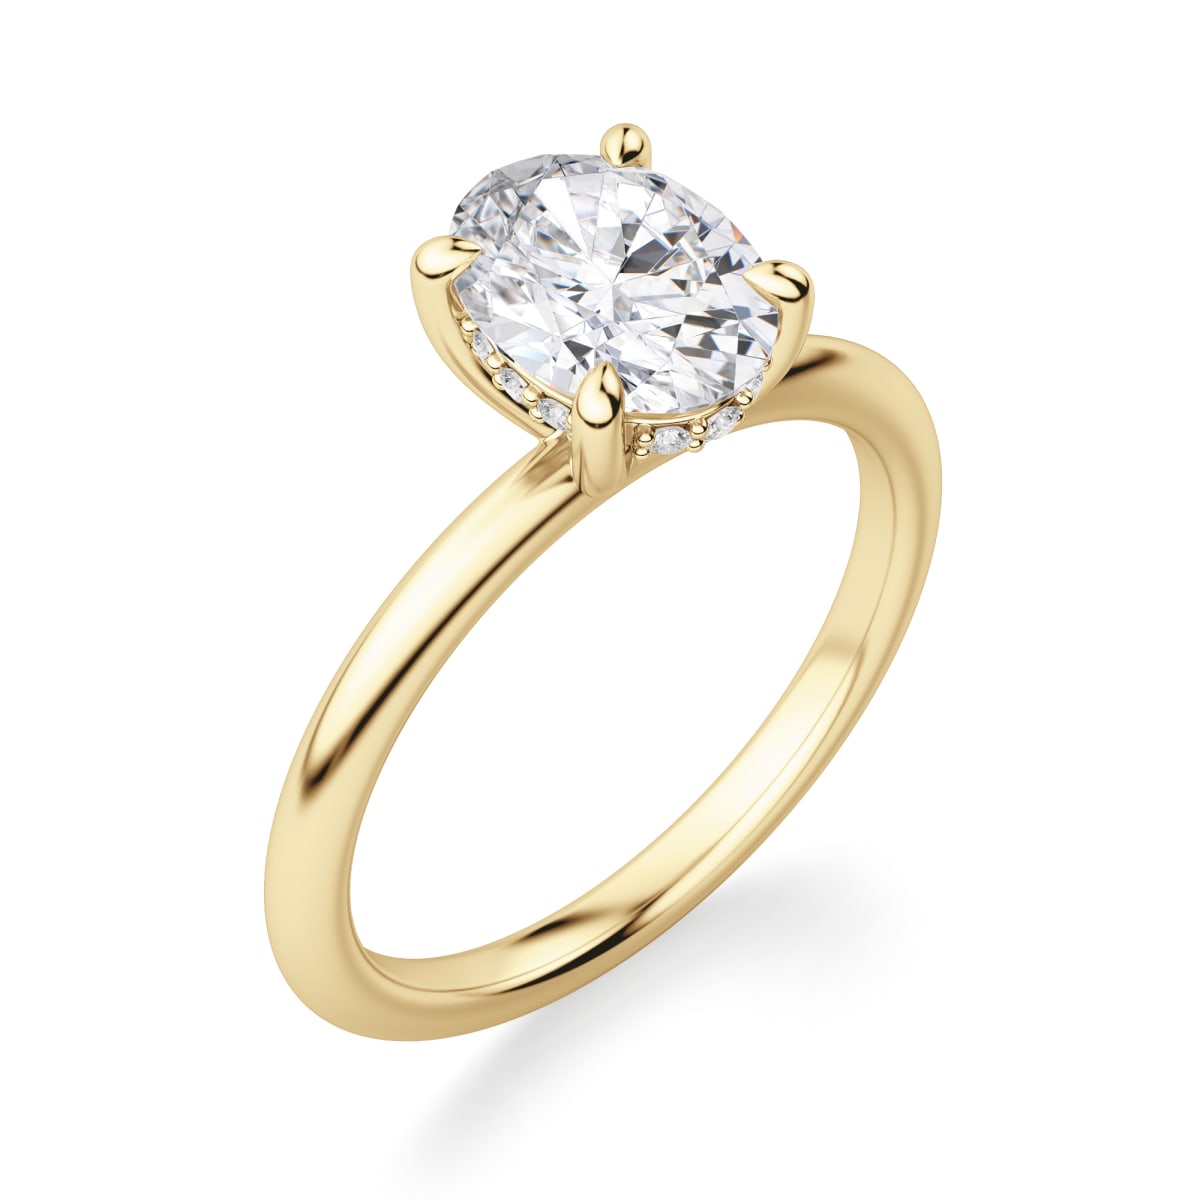 Hidden Halo Classic Engagement Ring With 2.00 ct Oval Center DEW, Ring Size 4.75, 14K Yellow Gold, Nexus Diamond Alternative